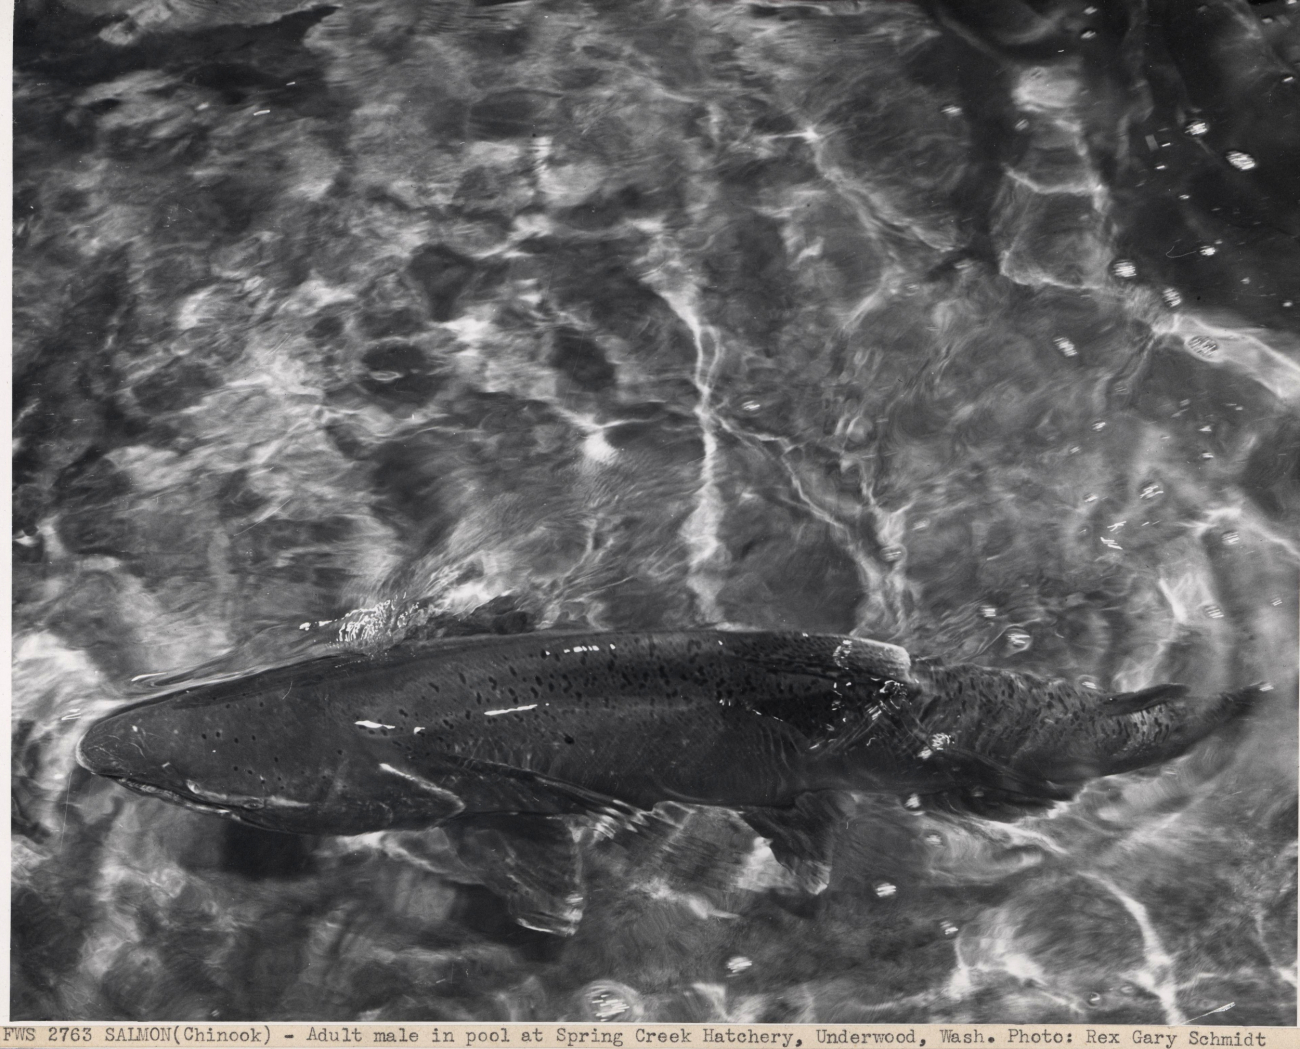 Adult male chinook salmon in hatchery pool at Spring CreekHatchery